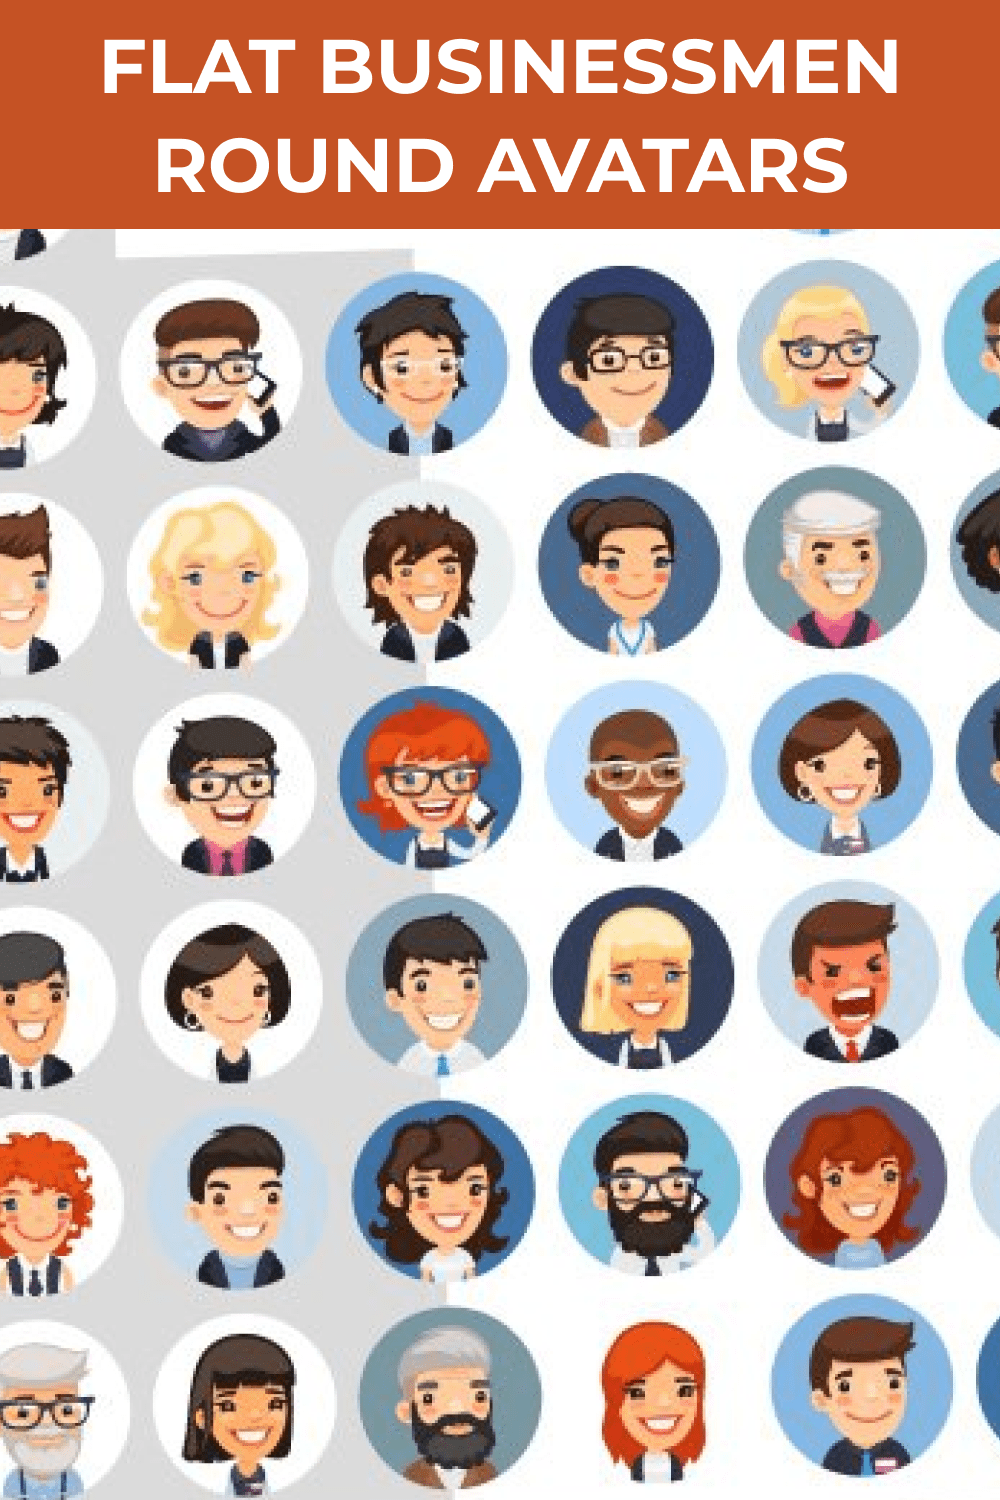 Cool avatars for your business.